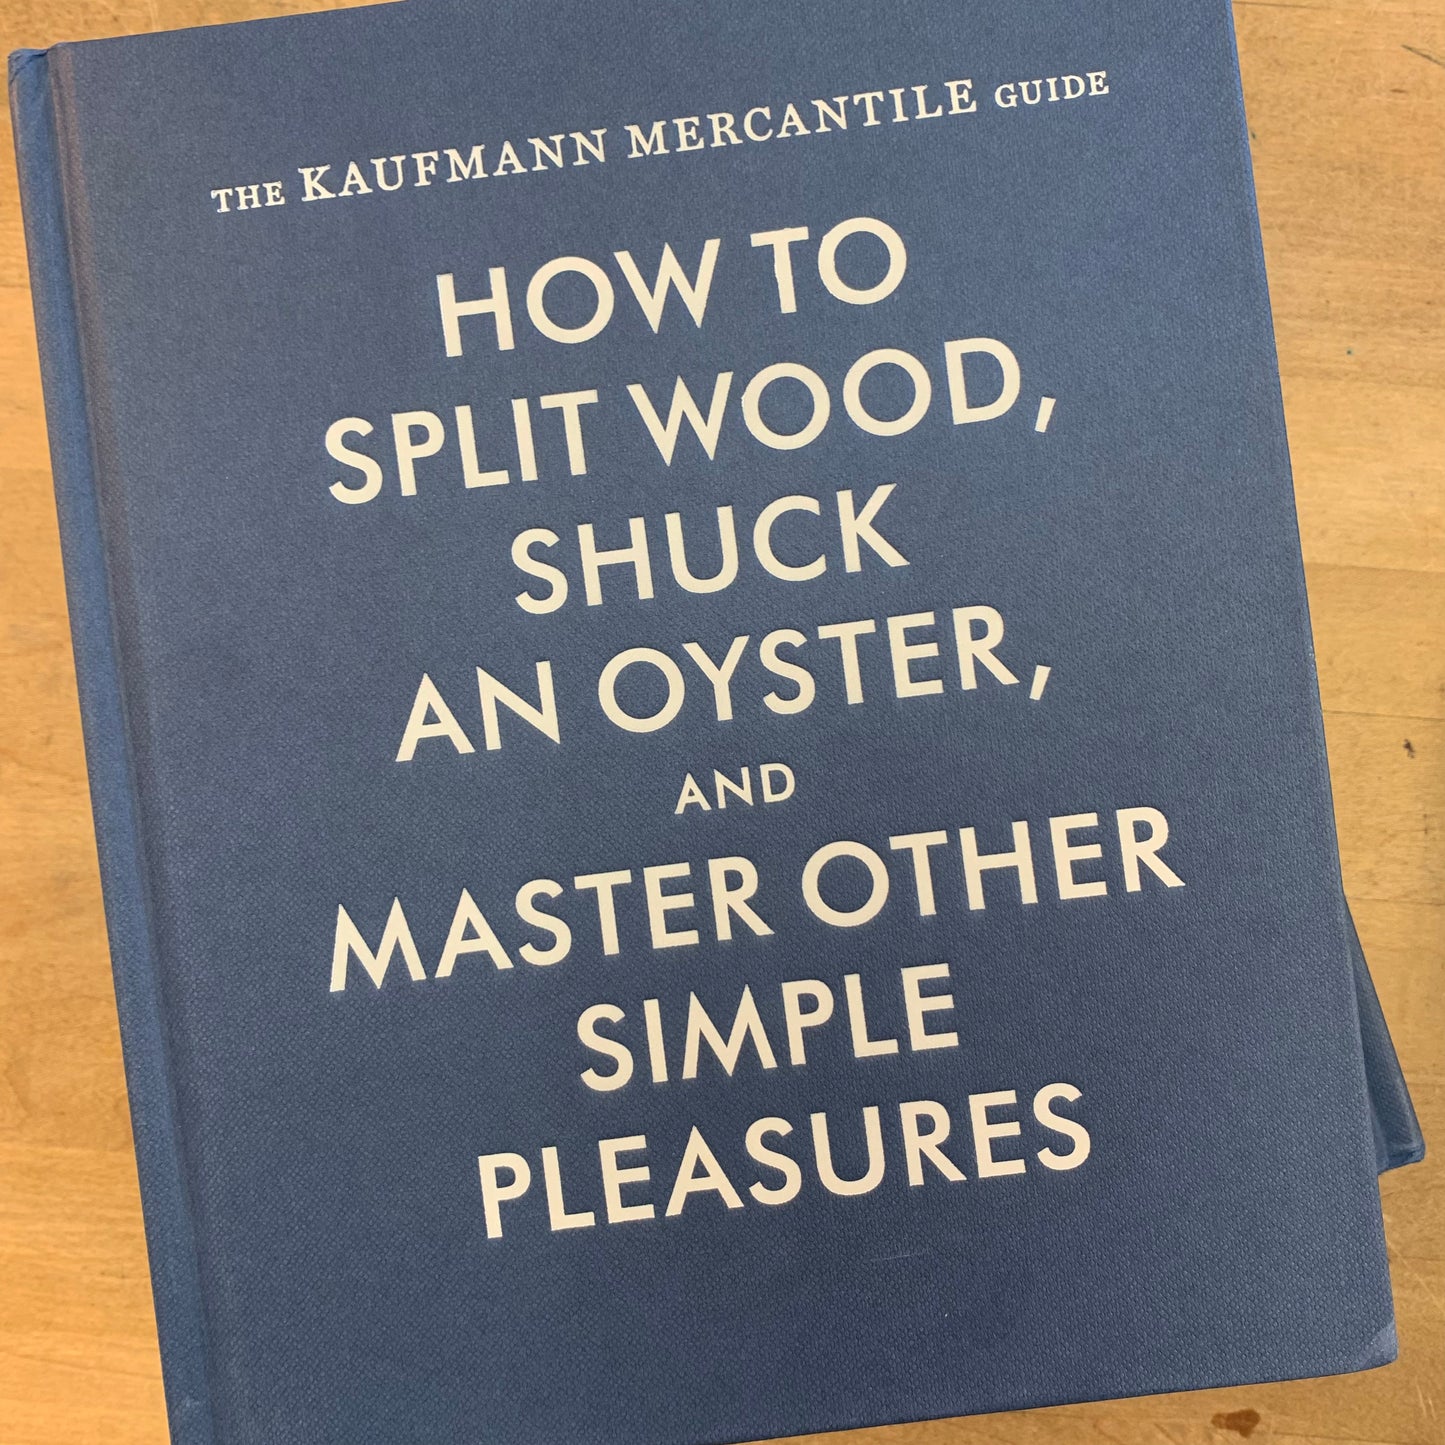 How to Split Wood, Shuck an Oyster, and Master Other Simple Pleasures